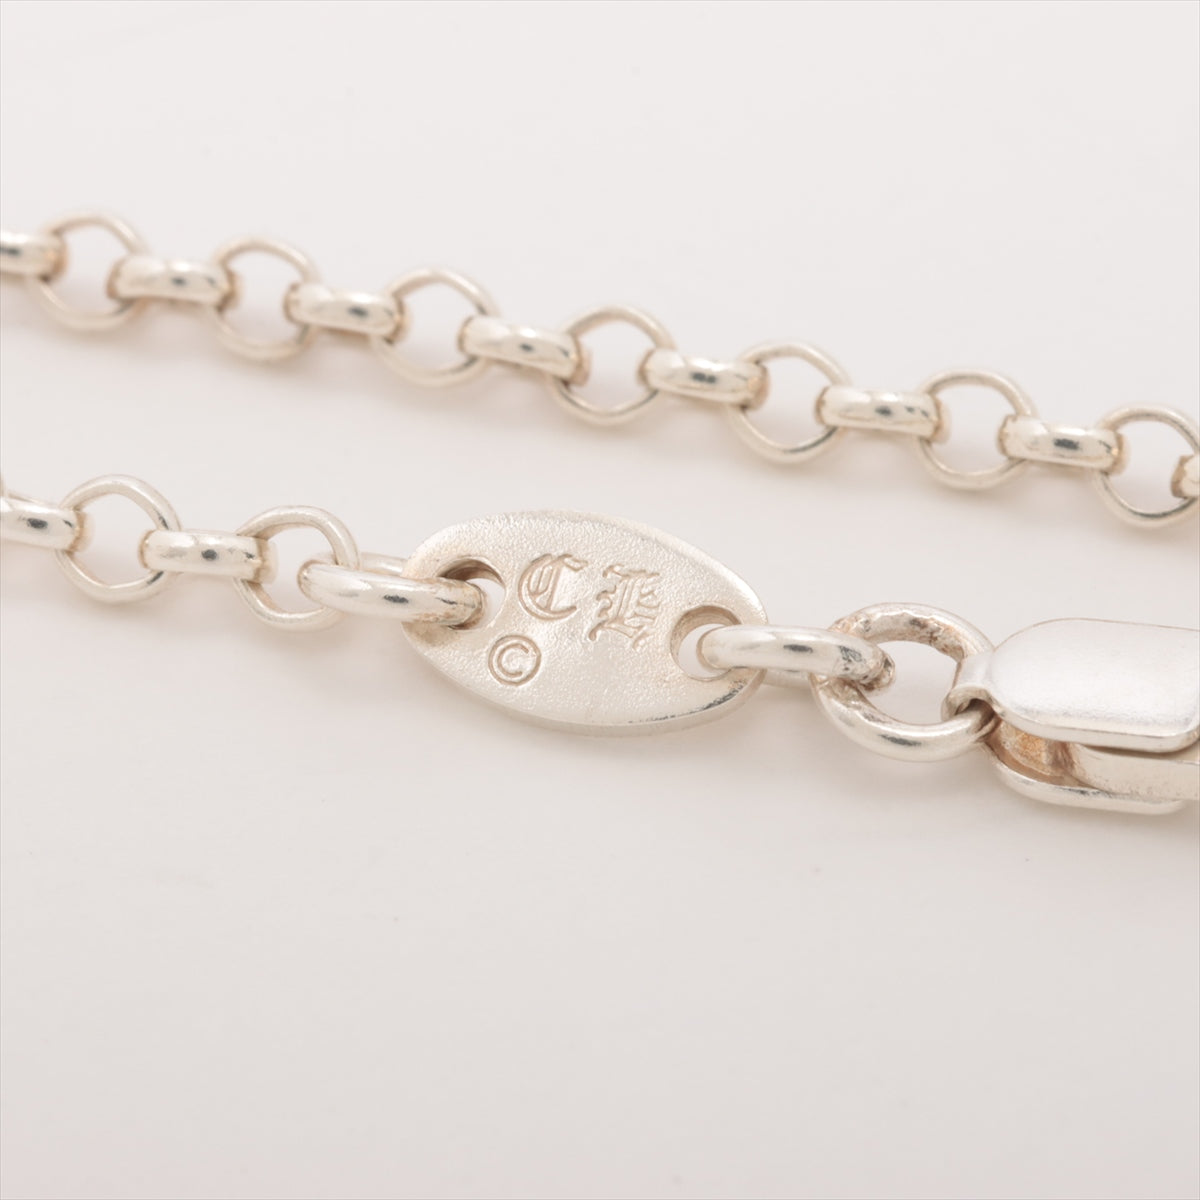 Chrome Hearts Roll Chain 20 Inches Necklace 925 5.3g